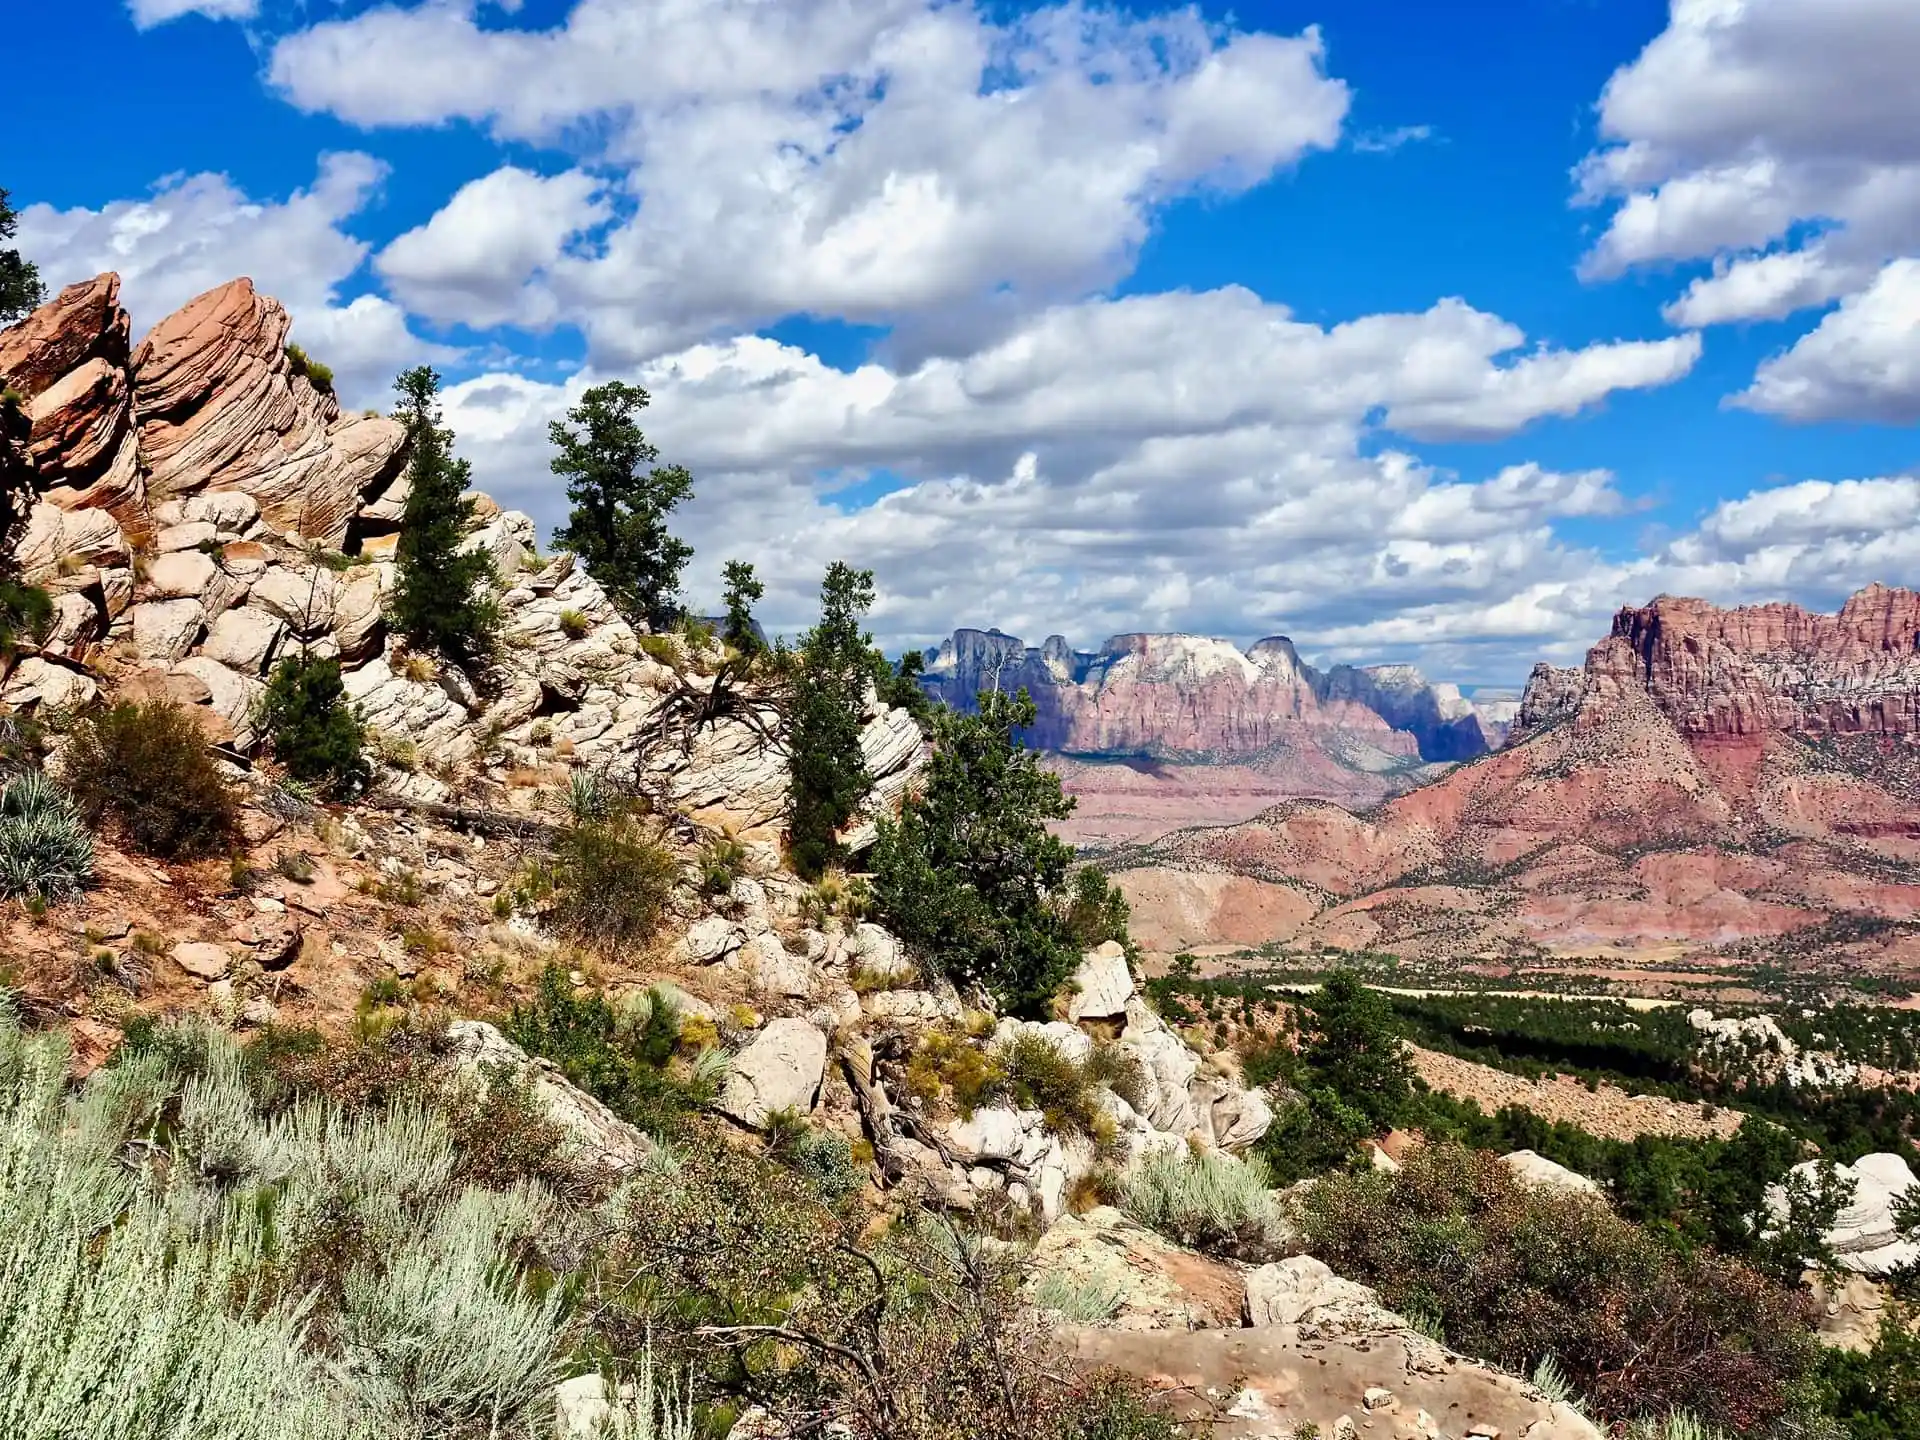 Amazing views of Zion National Park from the Eagle Crags trail